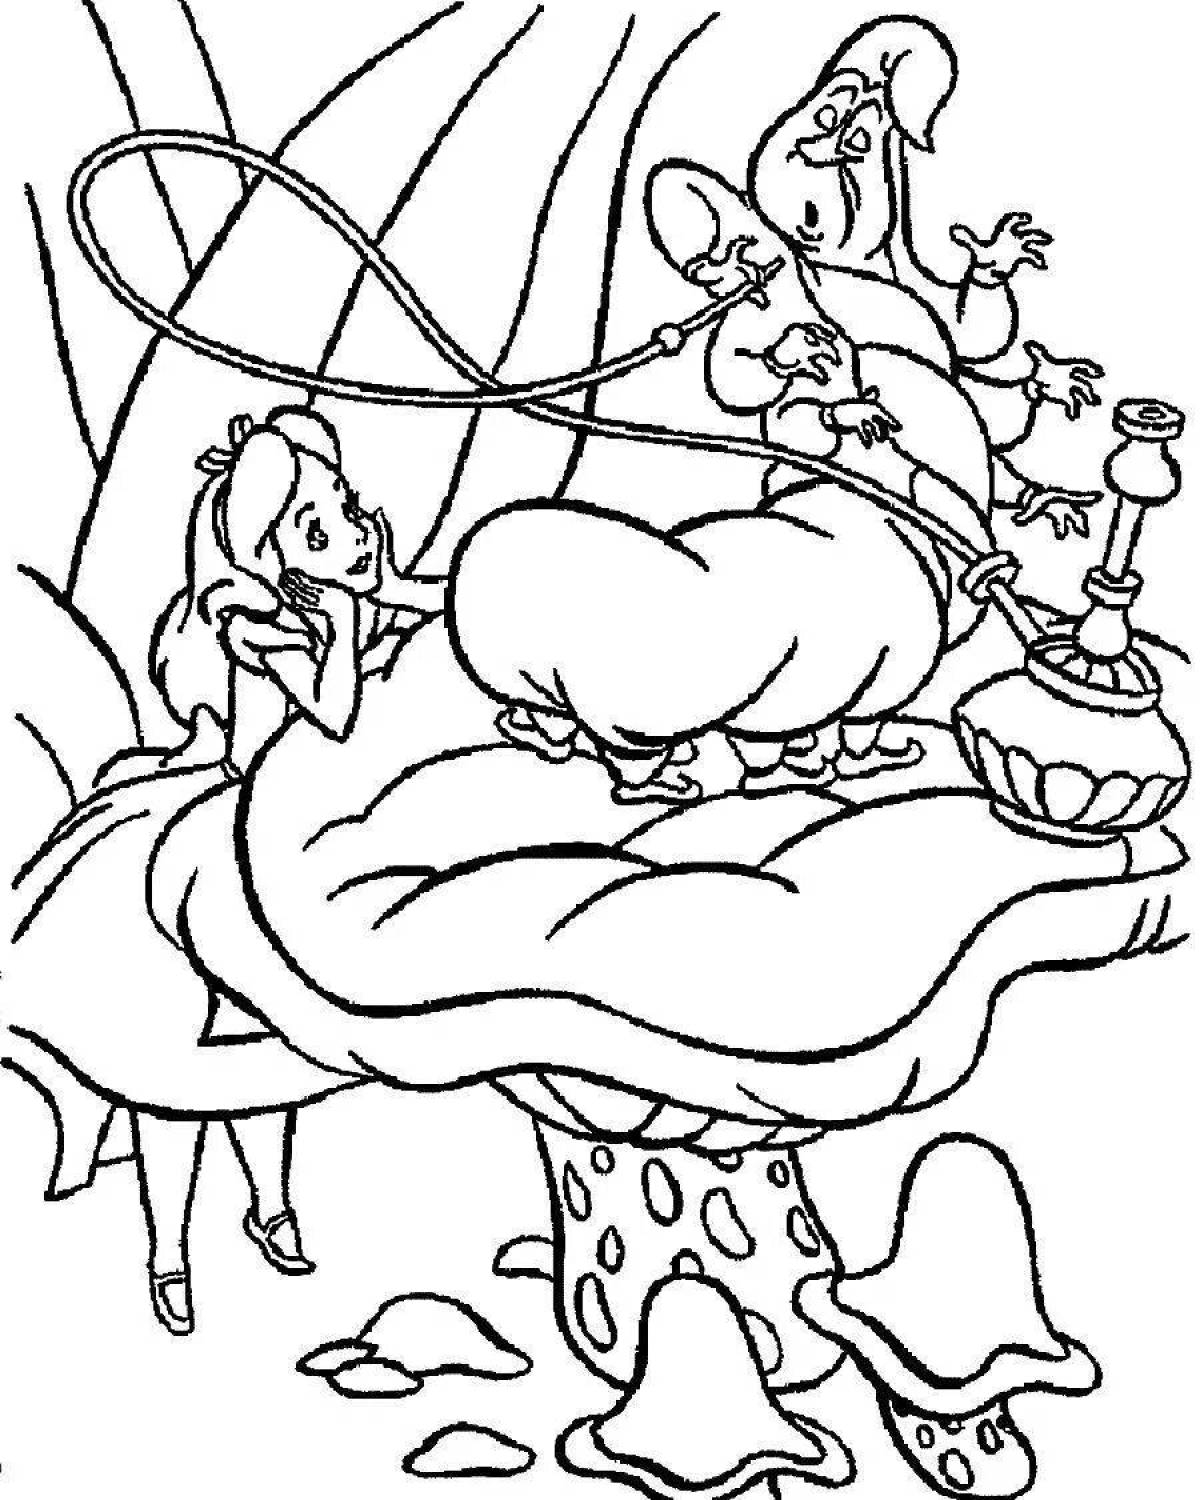 Colourful alice in wonderland coloring book for boys